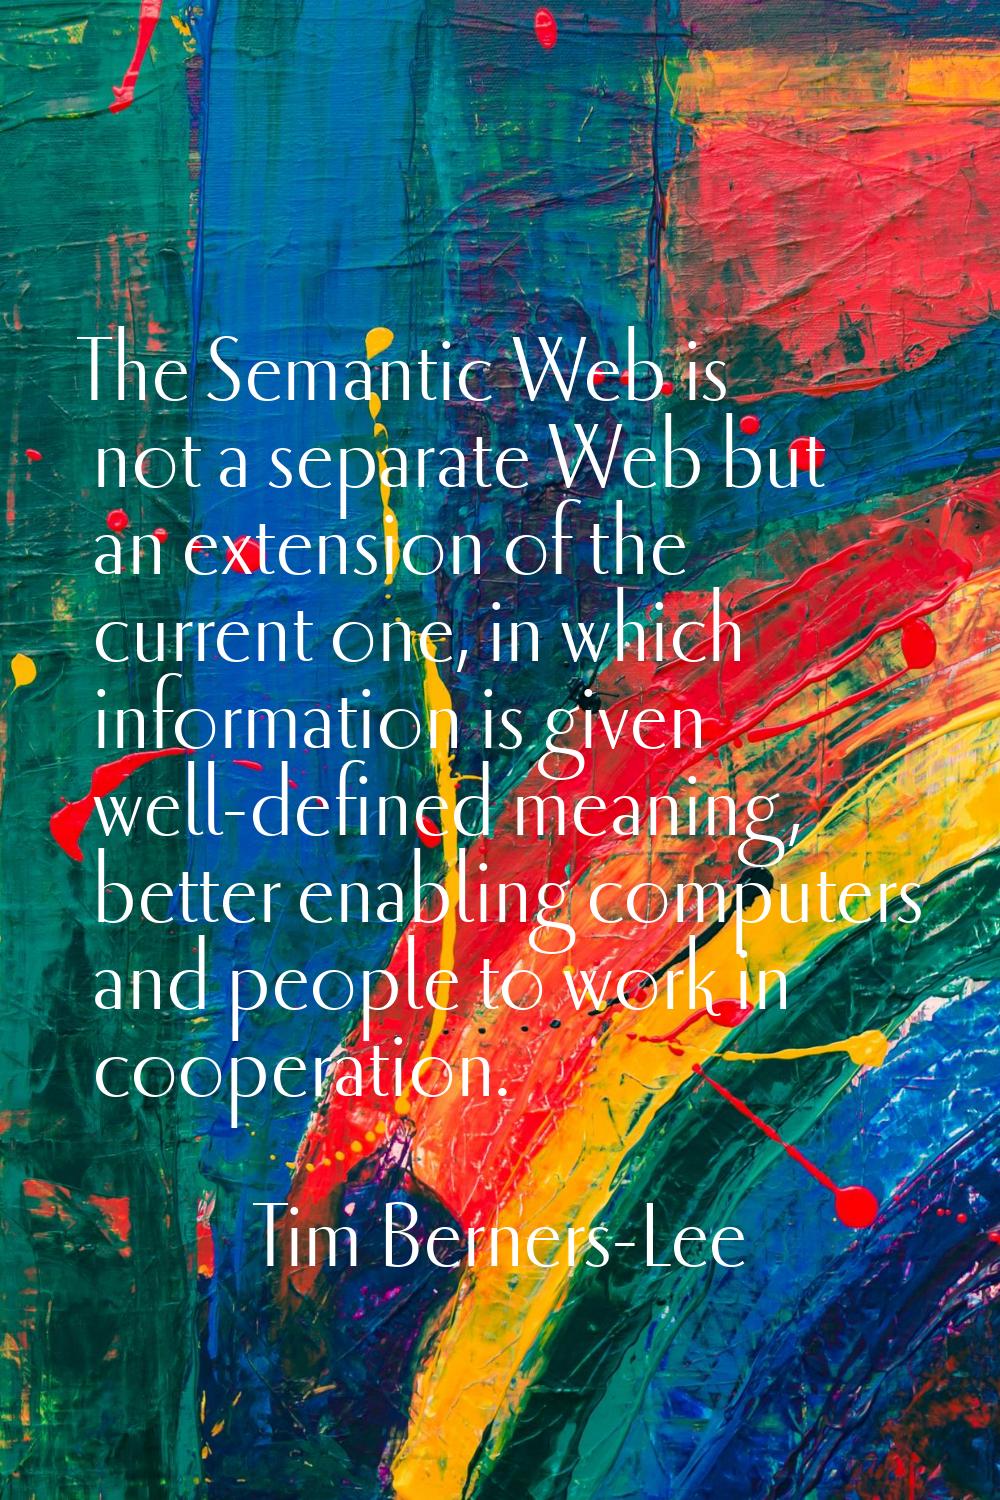 The Semantic Web is not a separate Web but an extension of the current one, in which information is